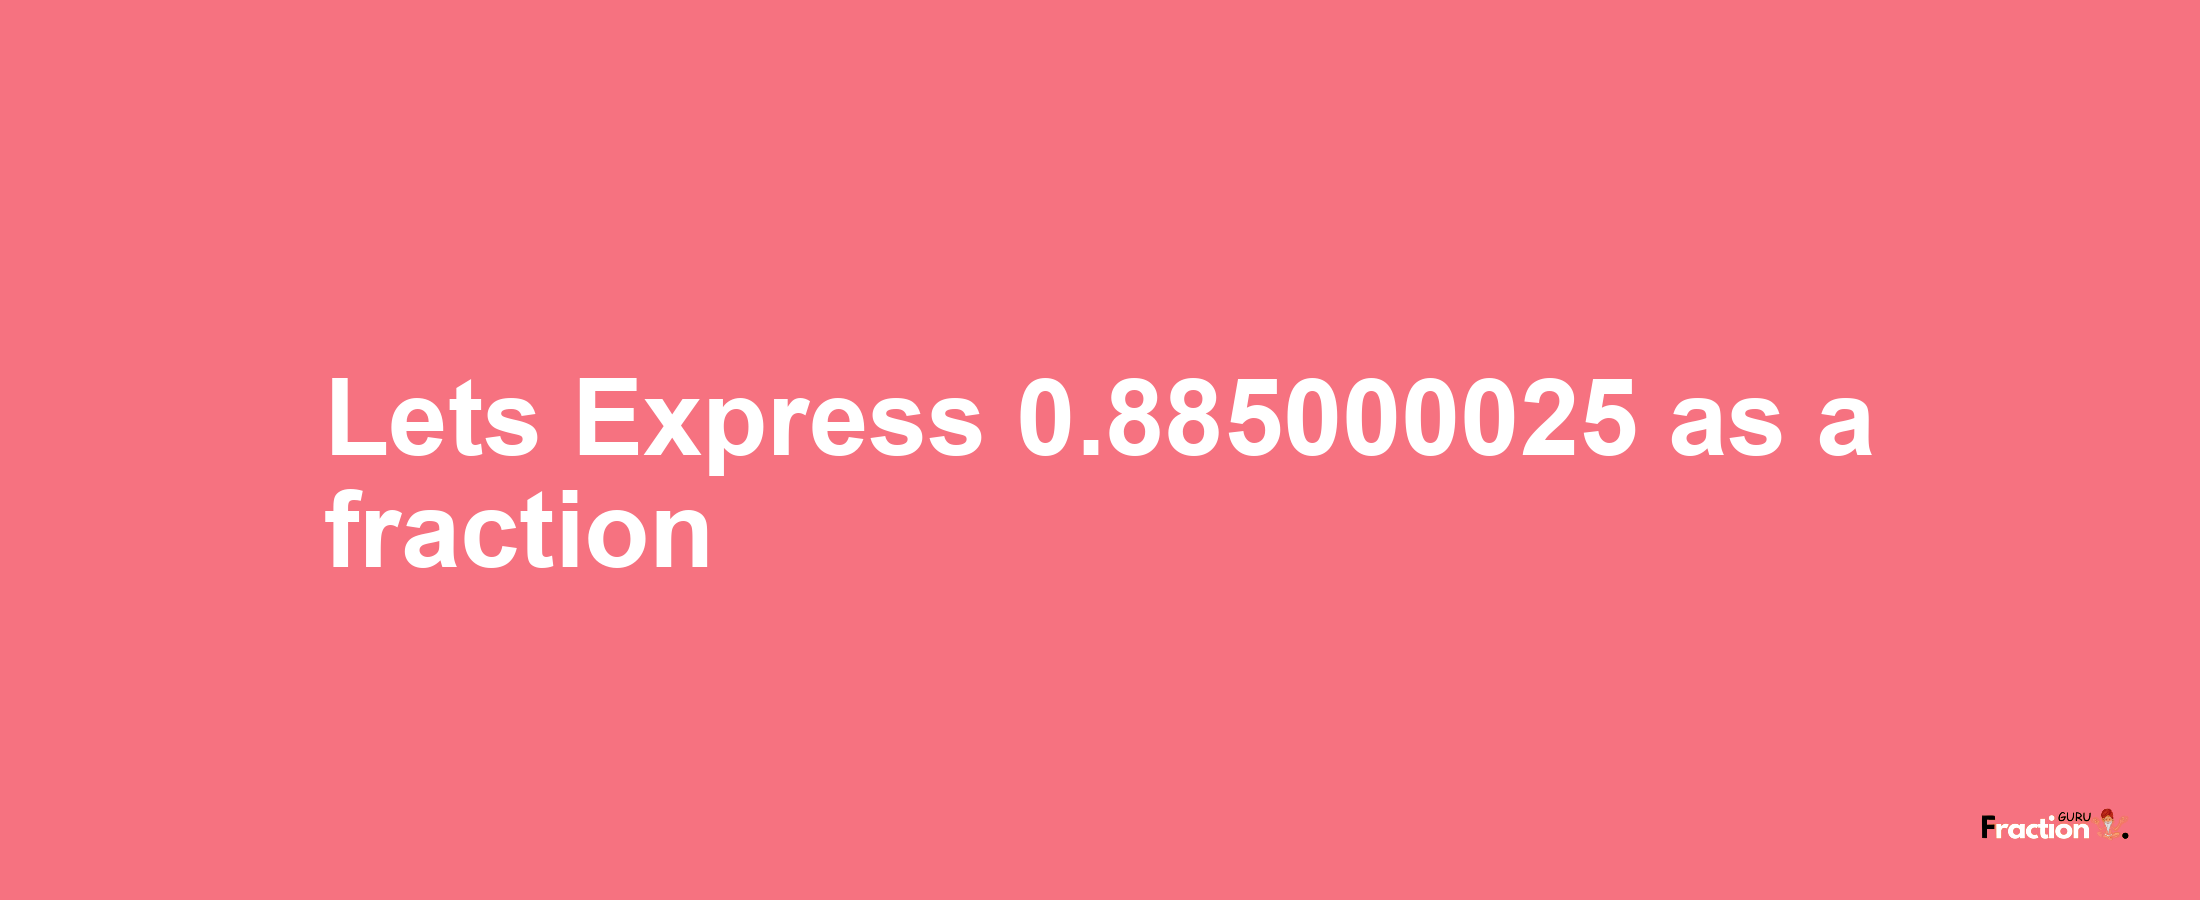 Lets Express 0.885000025 as afraction